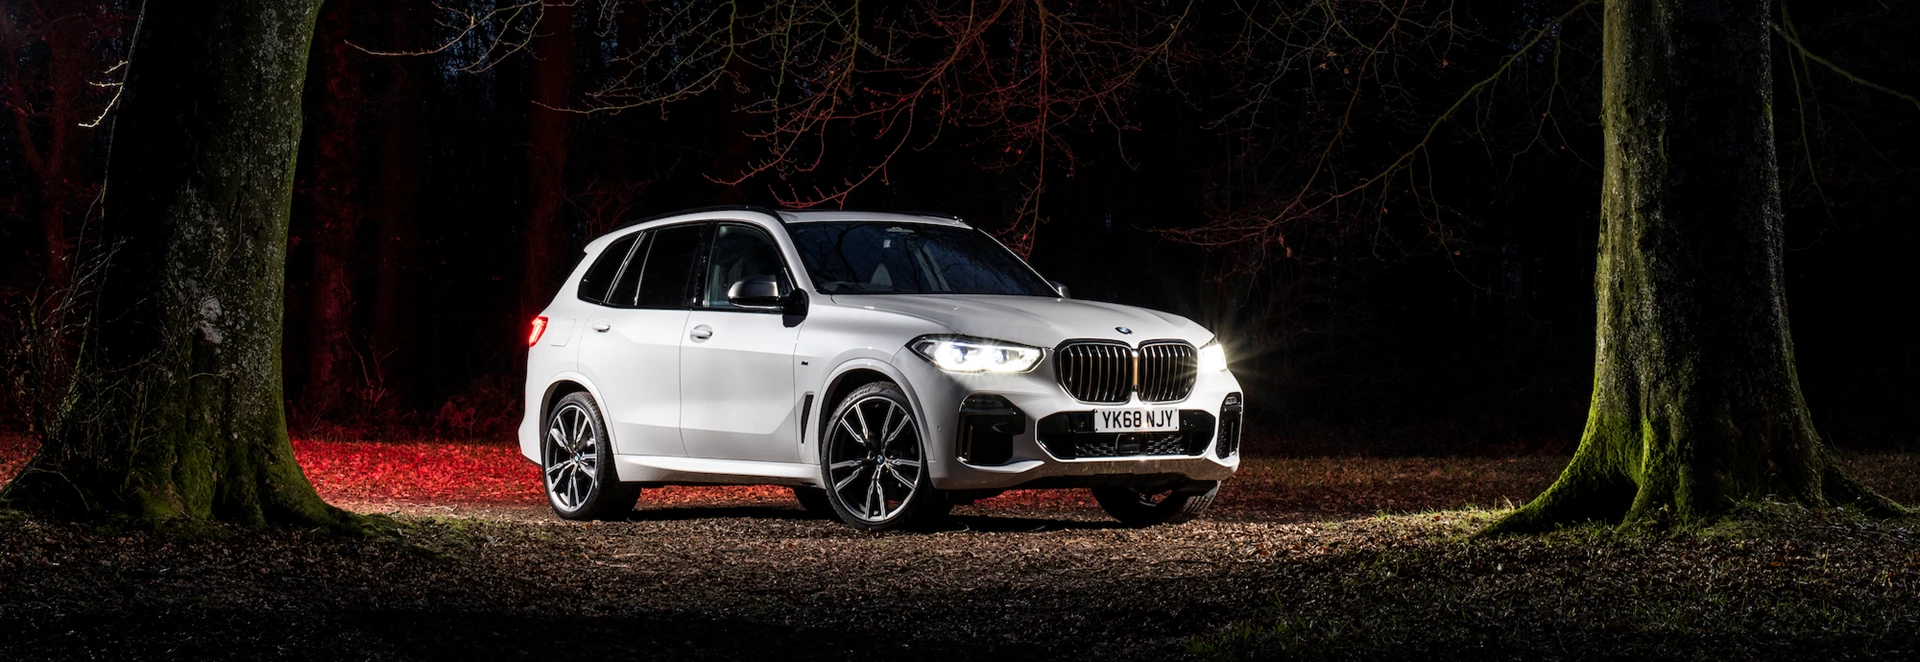 2018 BMW X5 review 